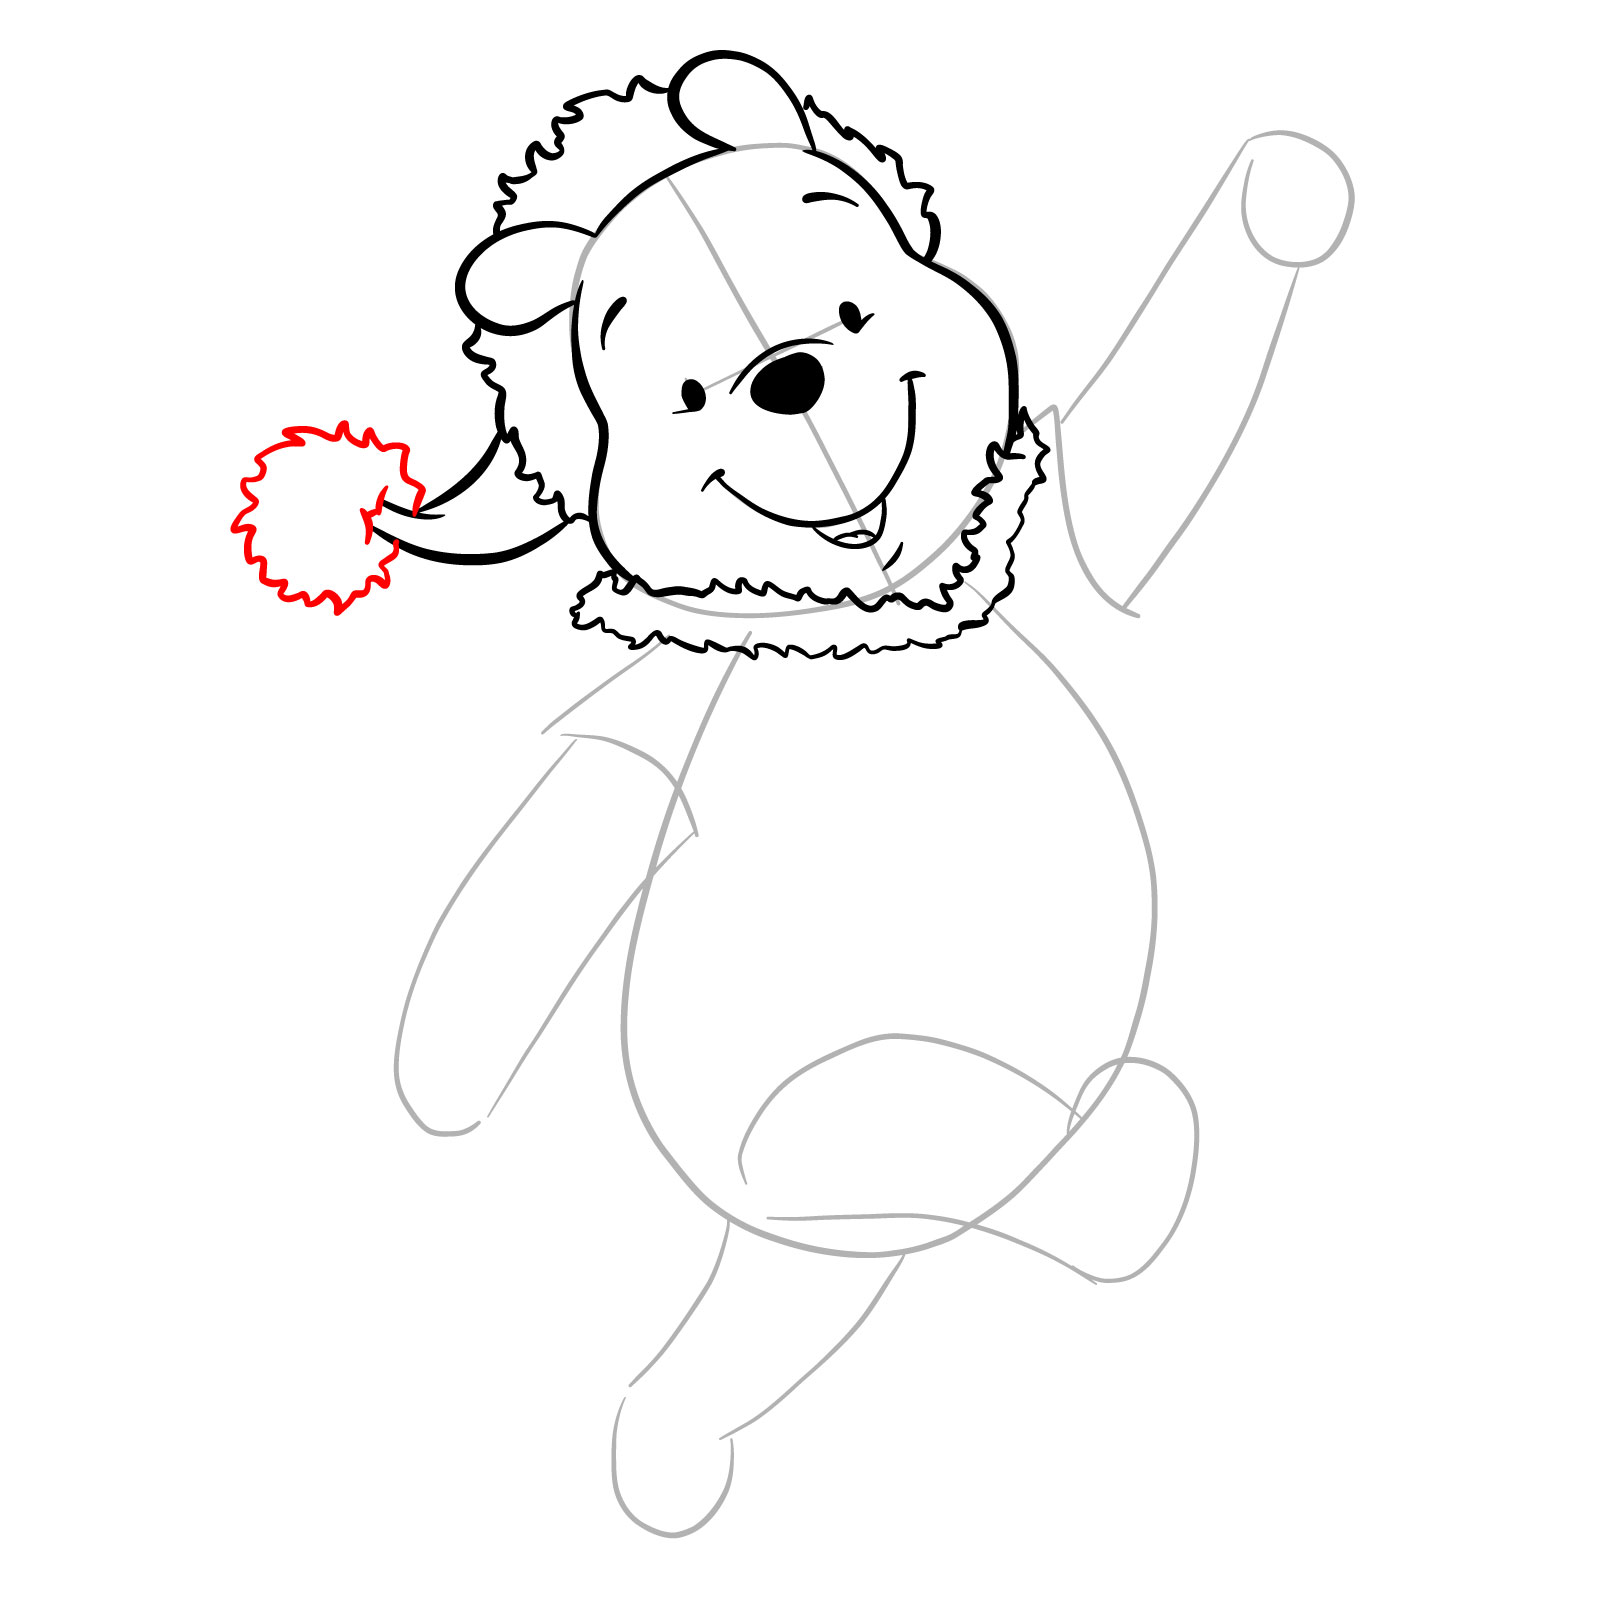 How to draw Winnie-the-Pooh Christmas style - step 14